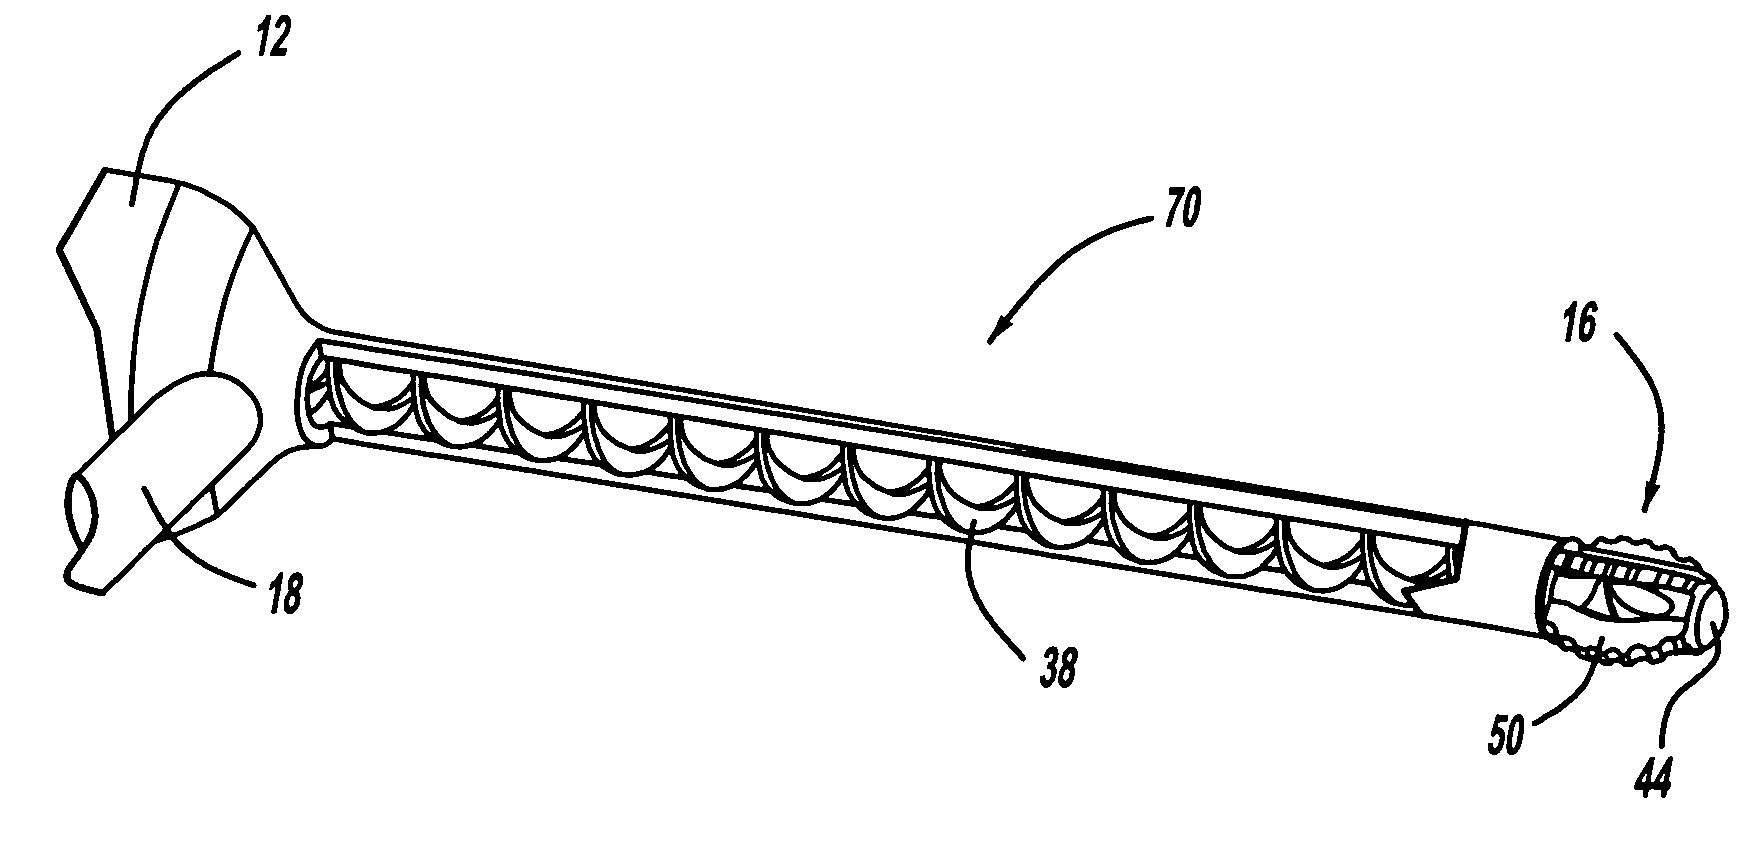 Disc space preparation device for spinal surgery